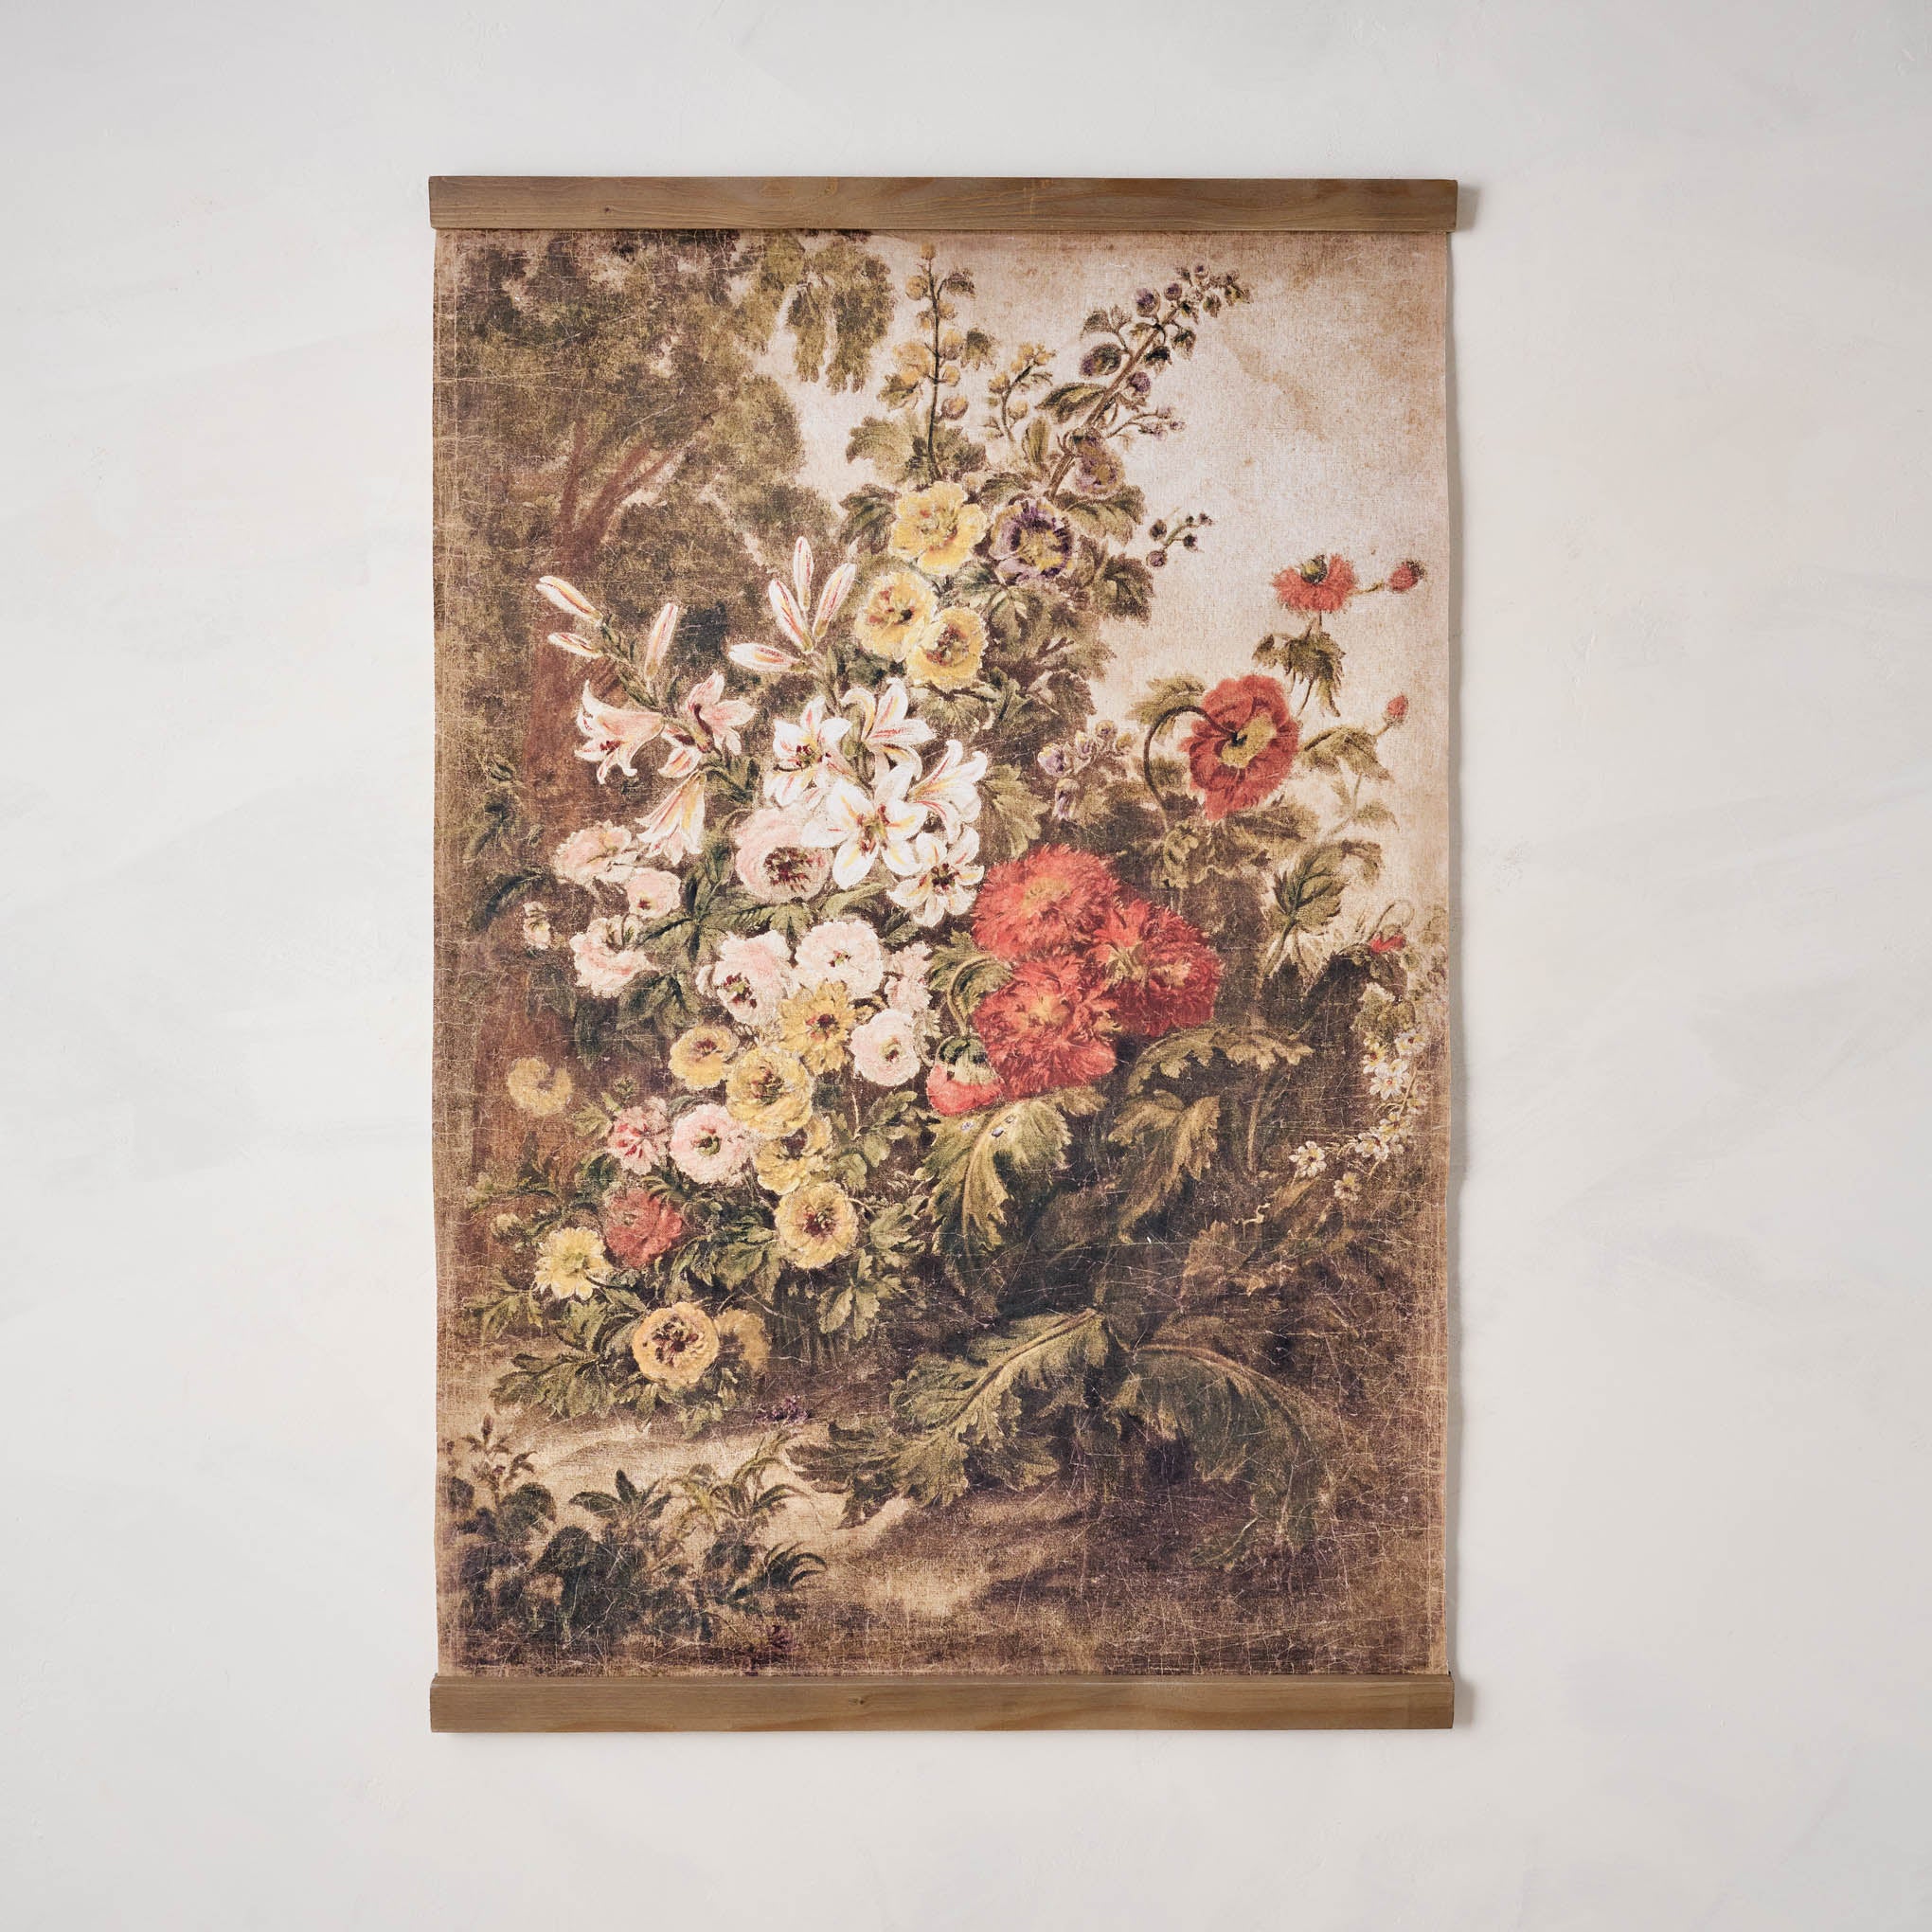 Wall art tapestry called Secret Garden Floral Tapestry